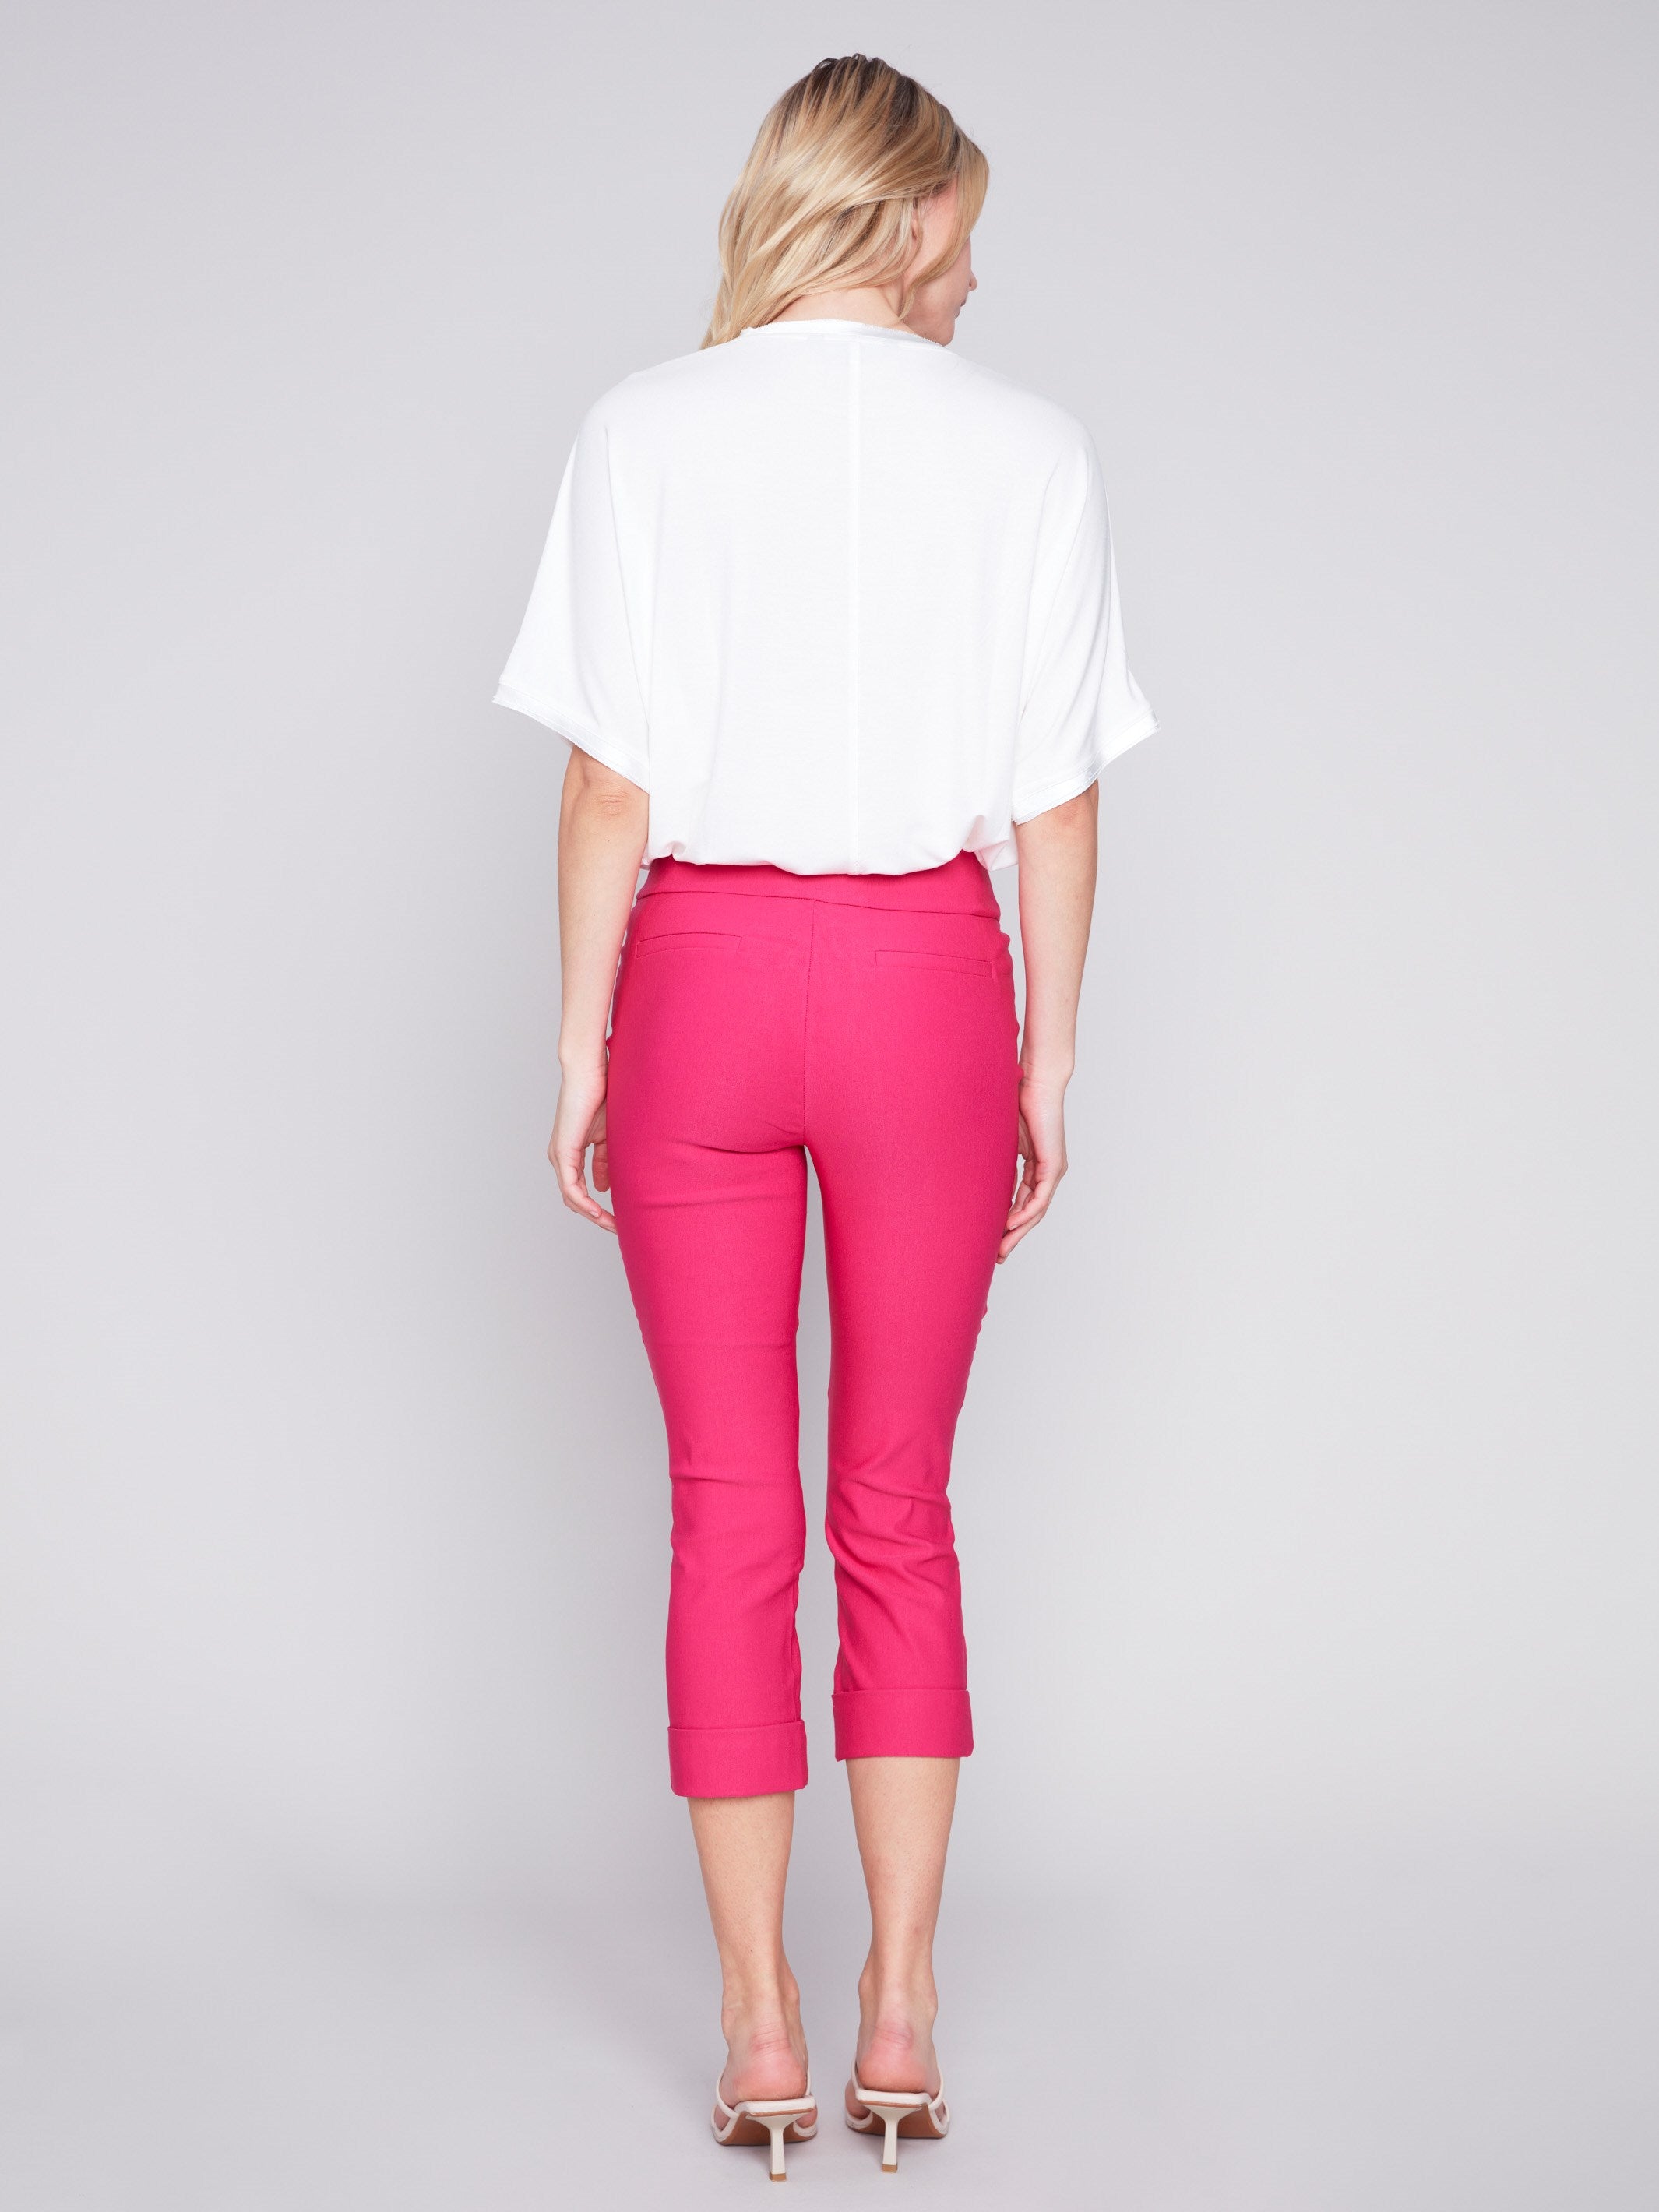 Stretch Pull-On Capri Pants - Punch - Charlie B Collection Canada - Image 4